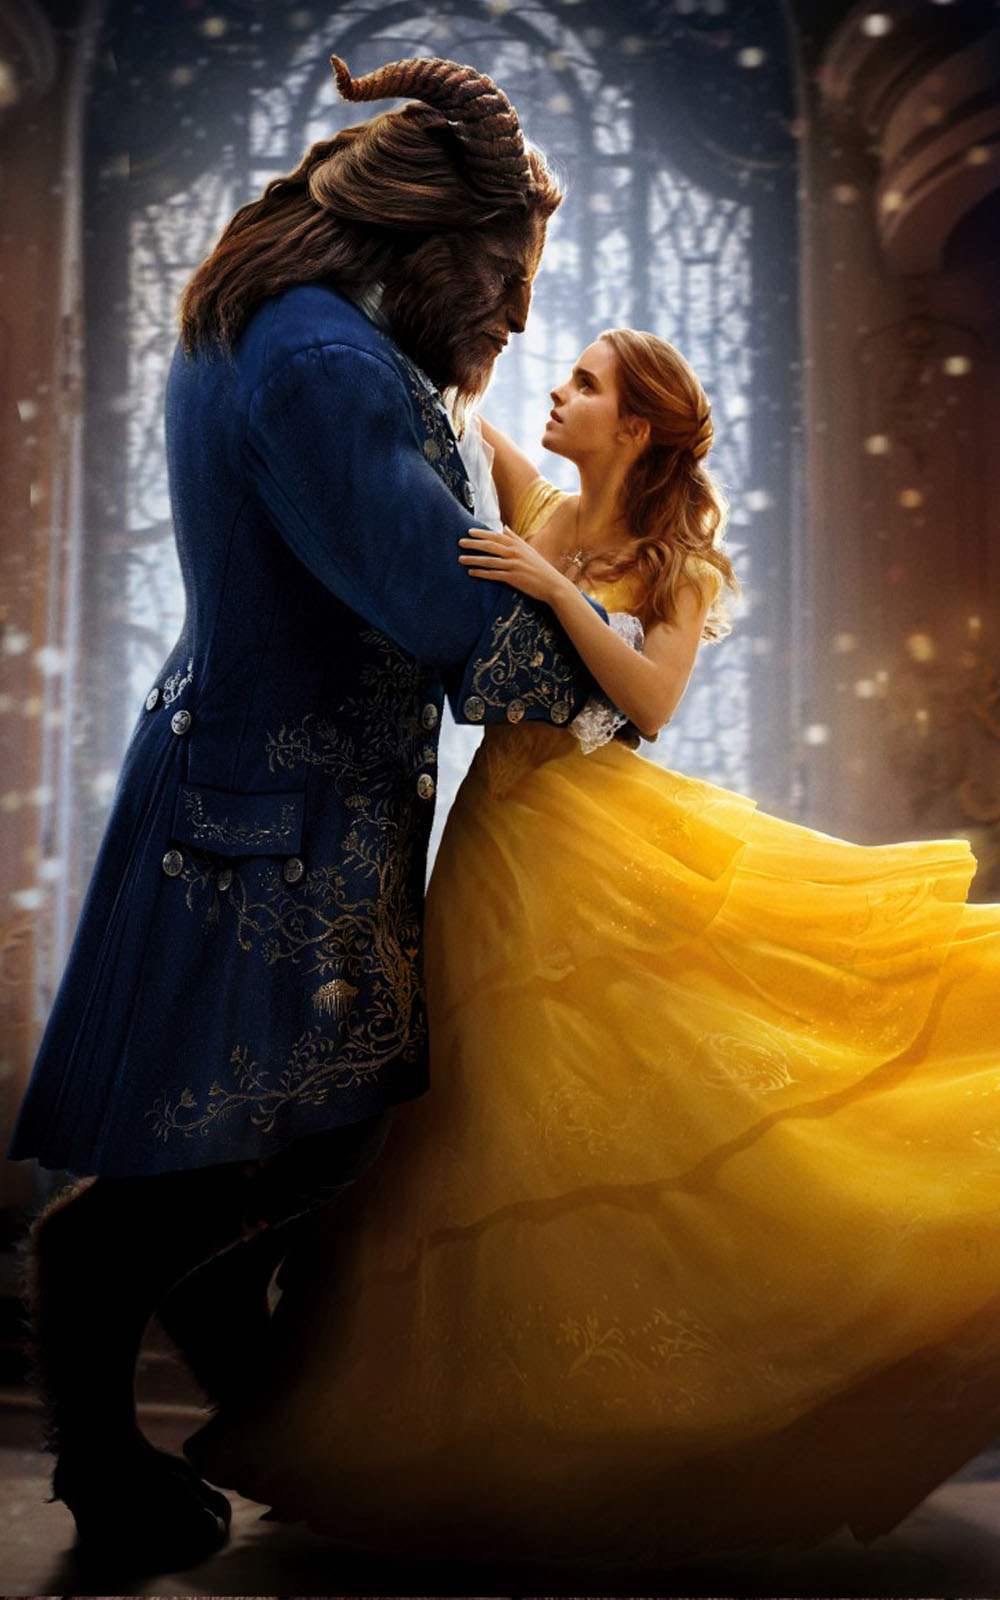 Beauty And The Beast 2017 New - Download Free HD Mobile Wallpapers